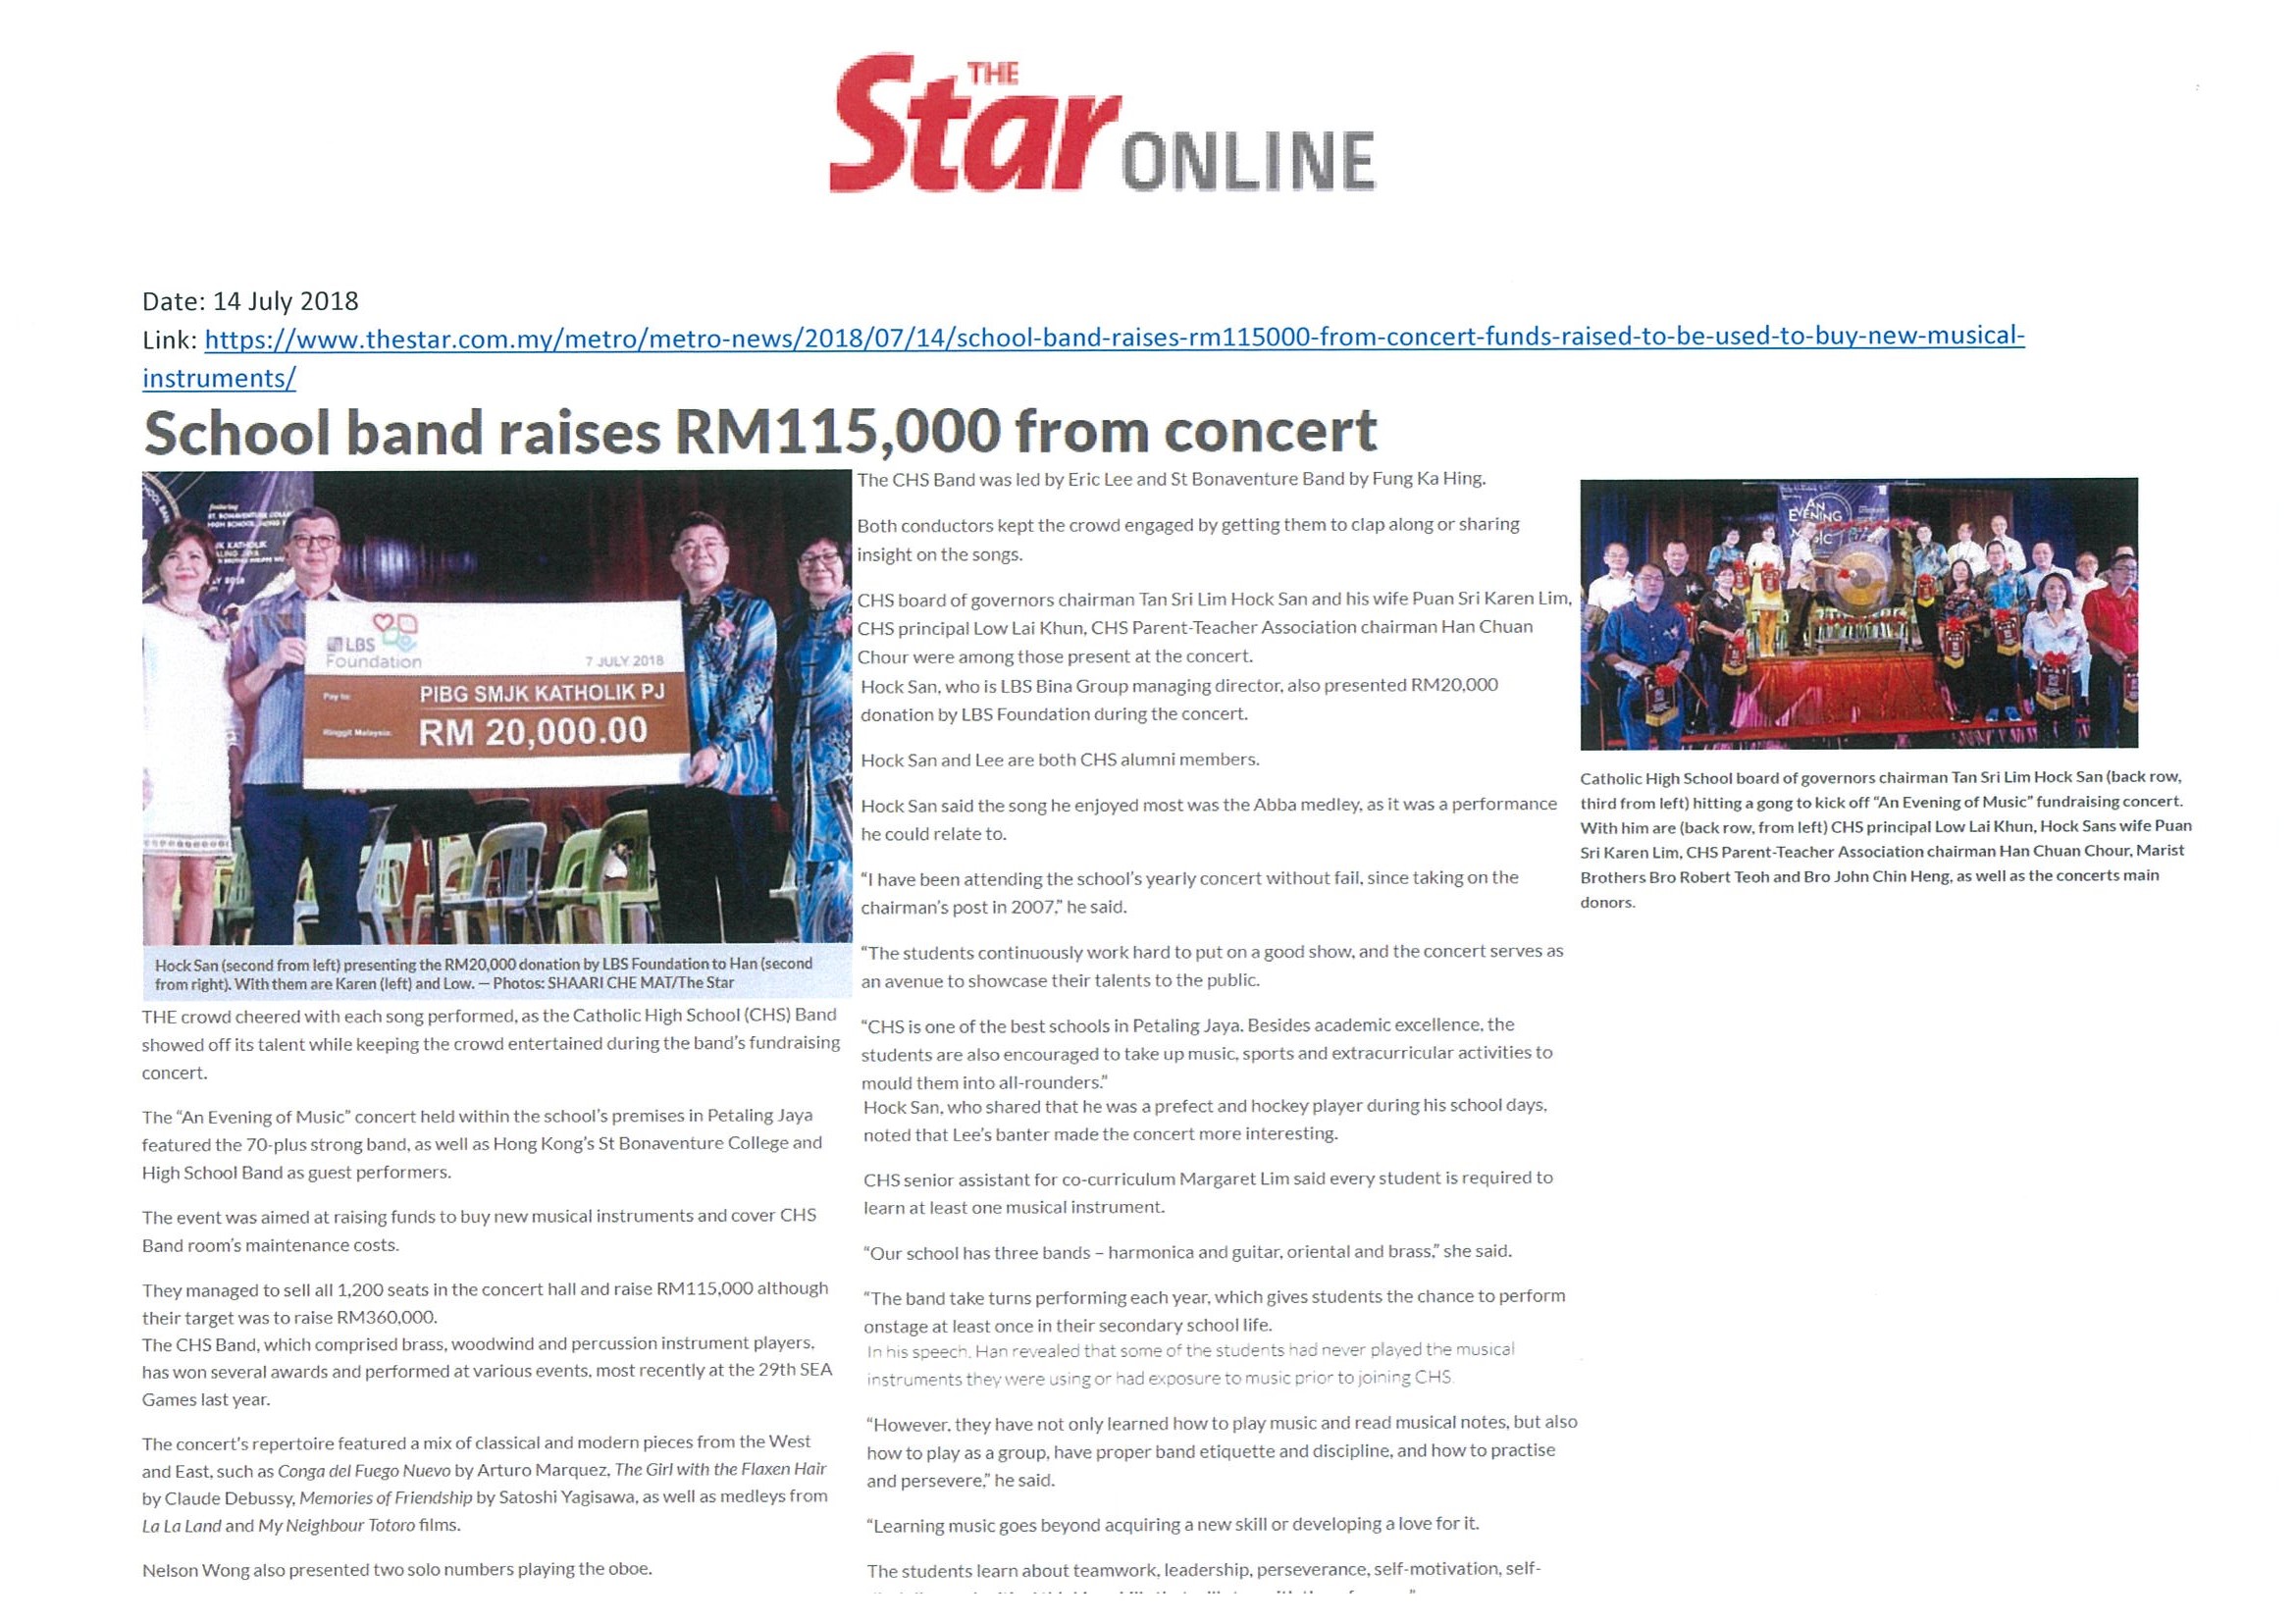 2018.07.14 The Star Online – School band raises RM115,000 from concert